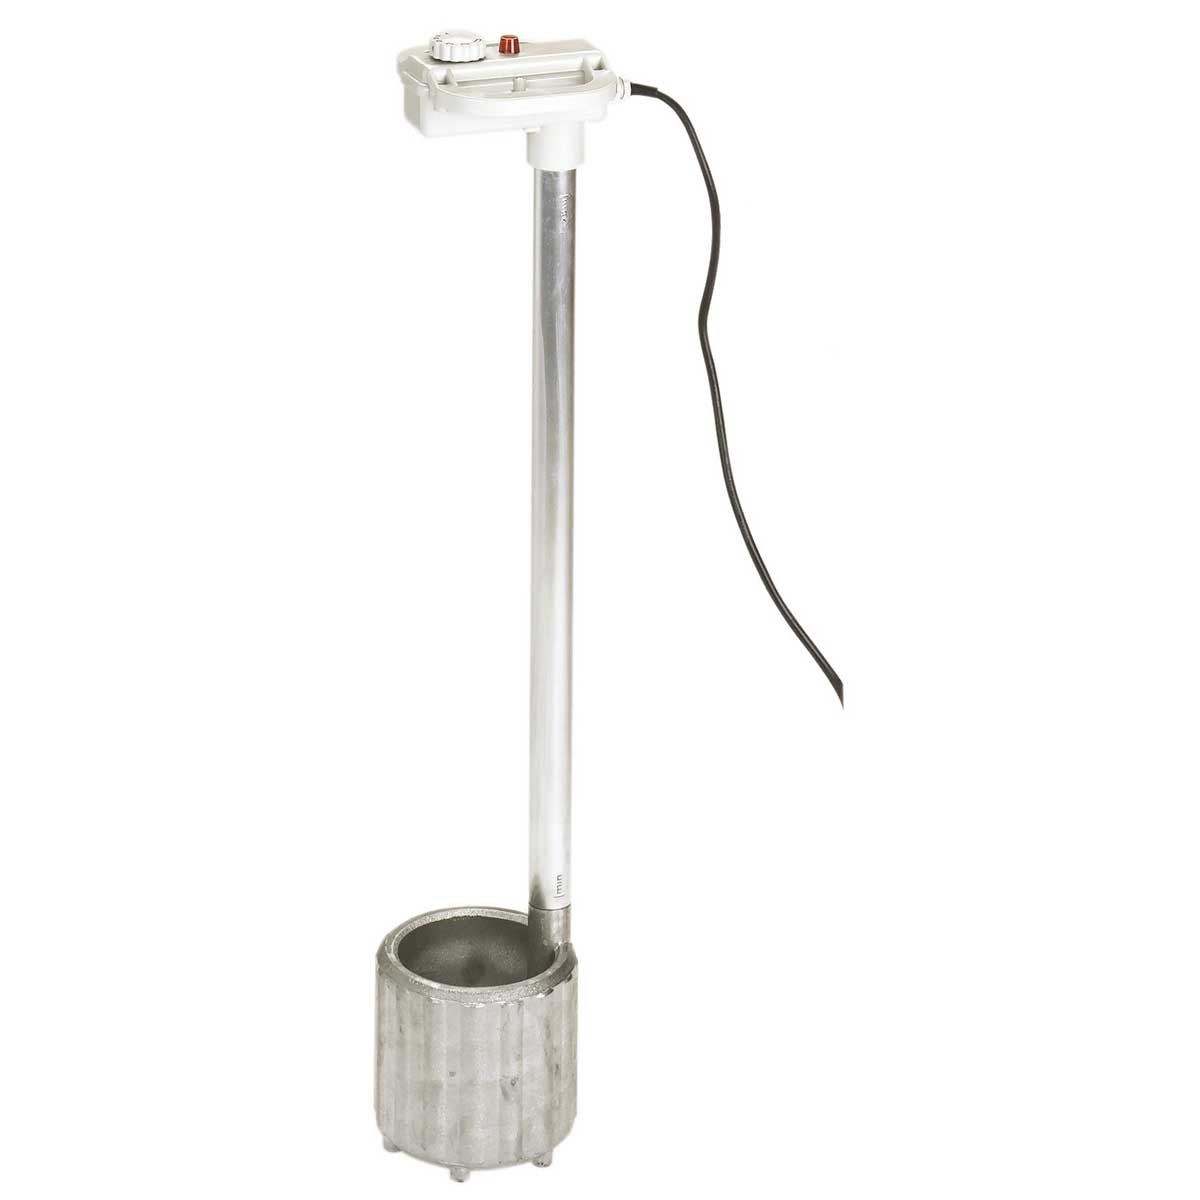 Milk heater with bow handle 2300 W